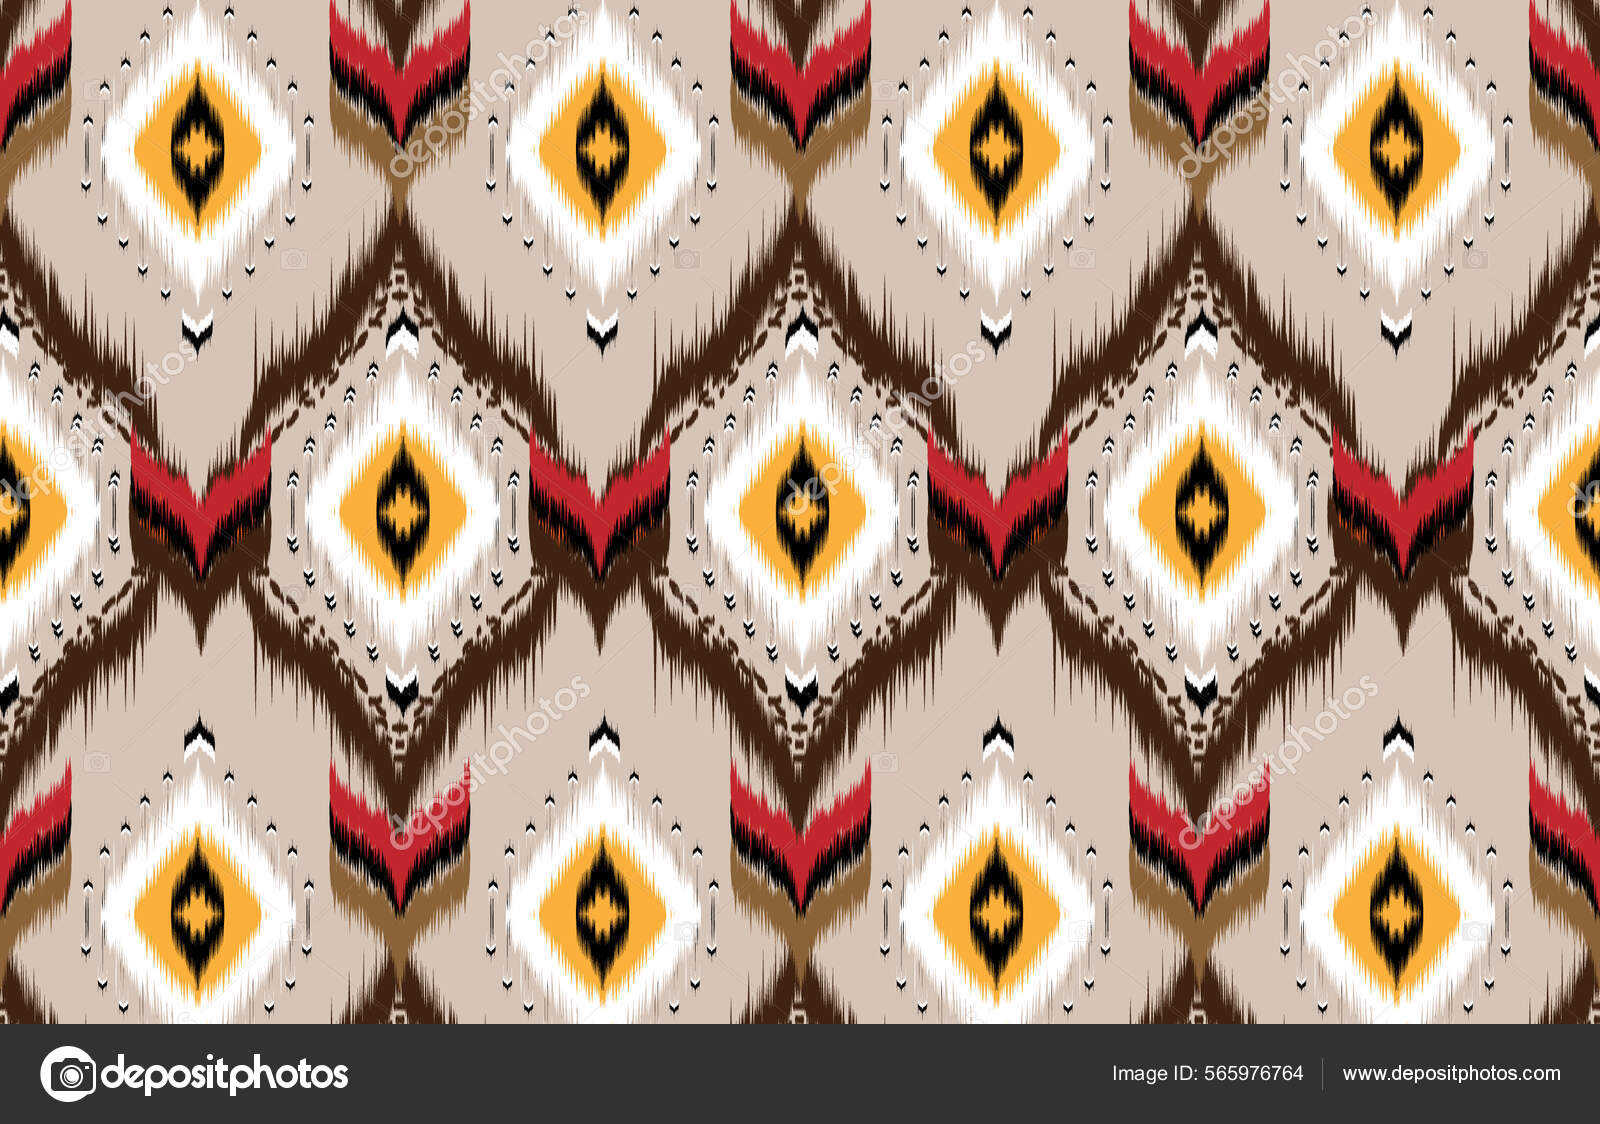 African kente cloth ethnic fabric seamless Vector Image